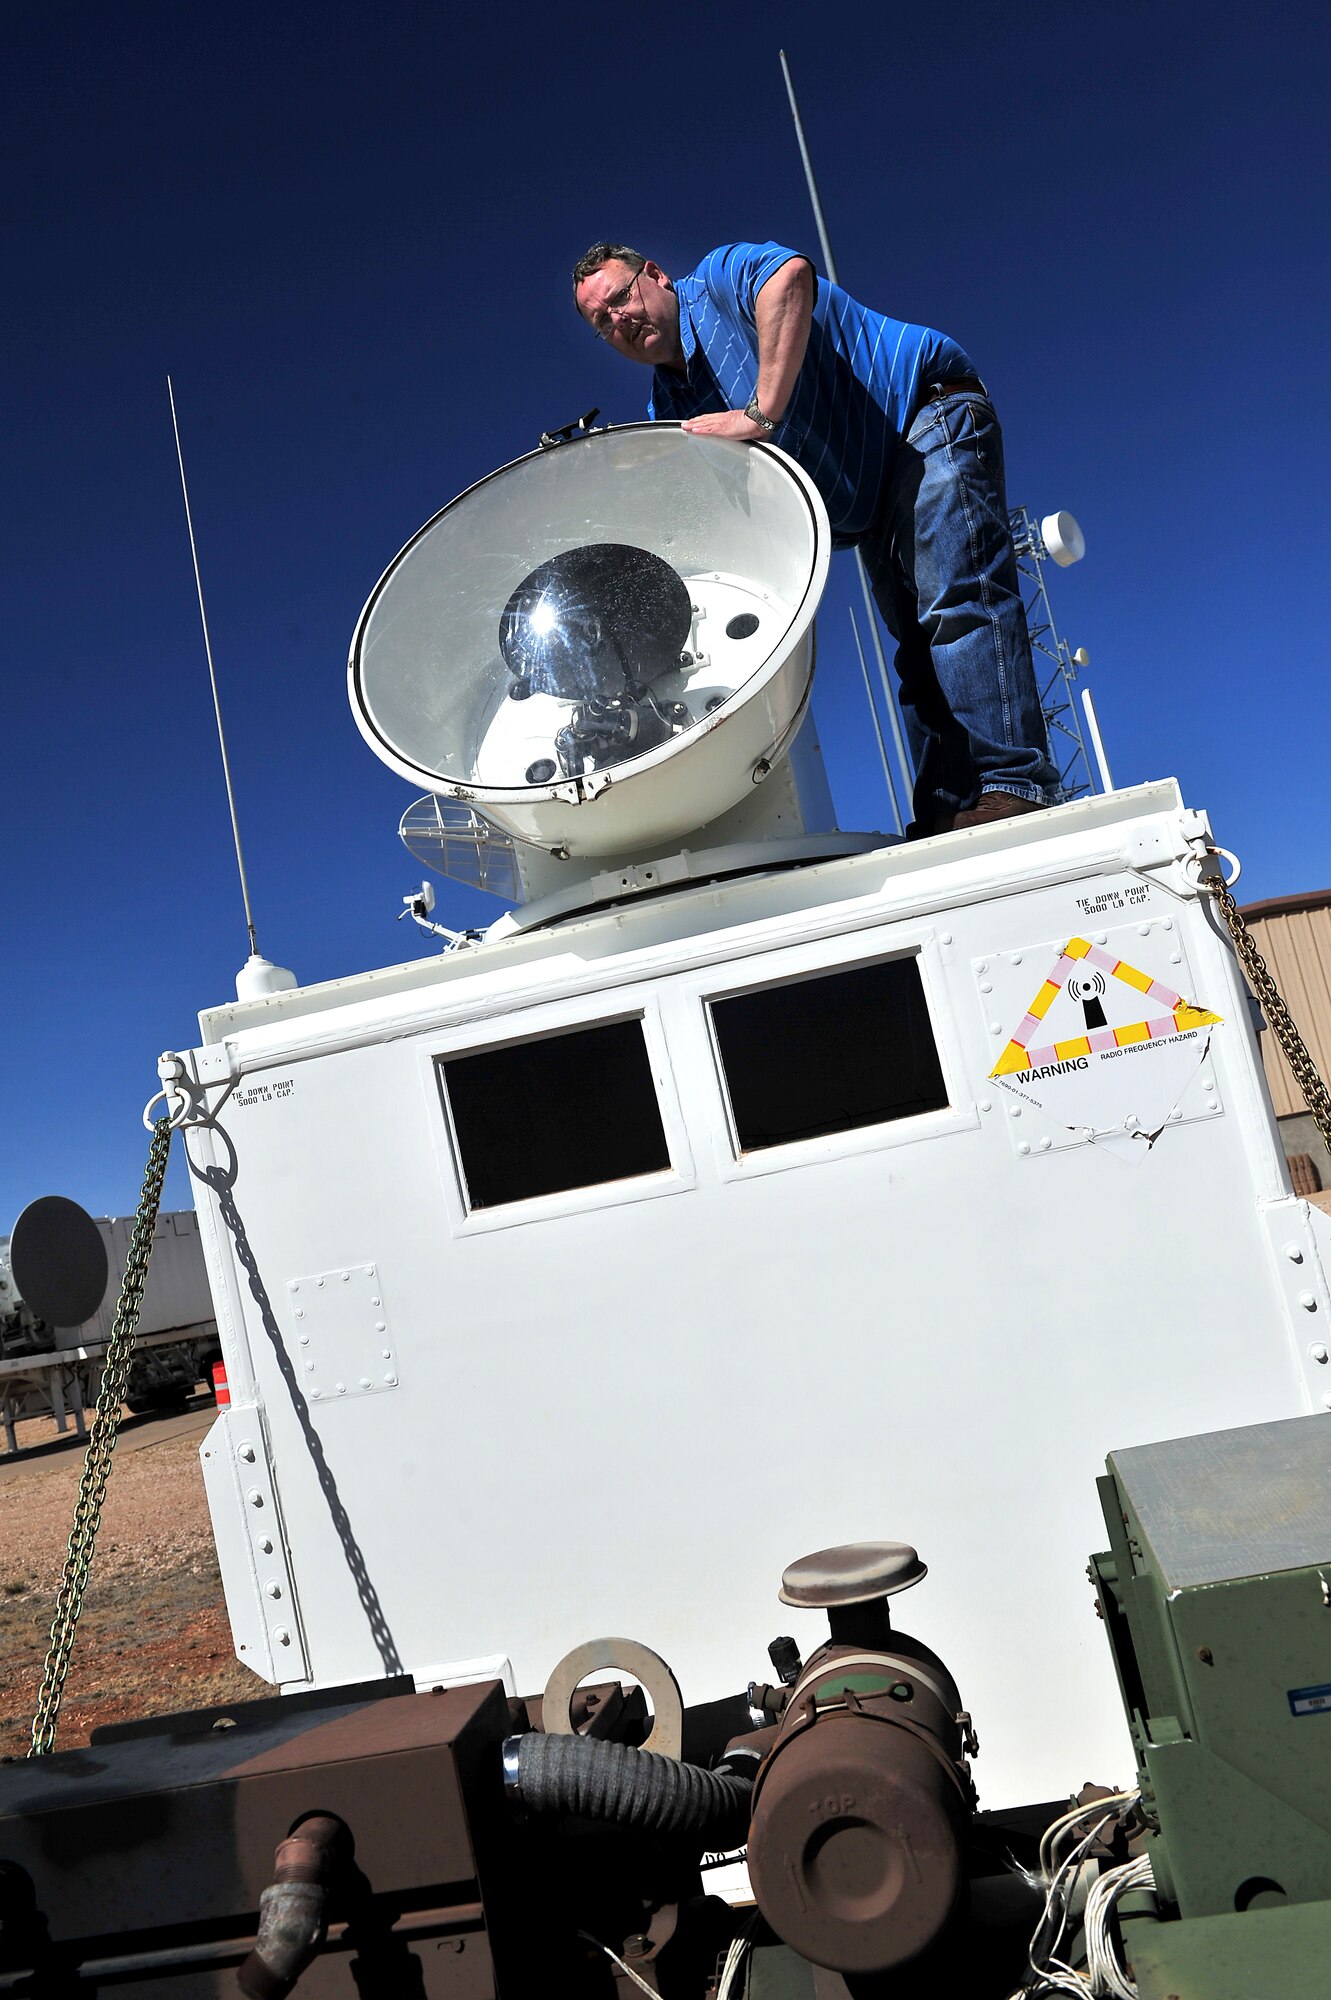 Ronald Moore, 27th Special Operations Support Squadron lead technician, adjusts a tactical radar threat generator used to simulate threats faced by aircrews at Melrose Air Force Range, N.M., March 5, 2012. Melrose Range provides space for realistic training of ground and air forces and is operated by Cannon Air Force Base, N.M. (U.S. Air Force photo by Tech. Sgt. Josef Cole)